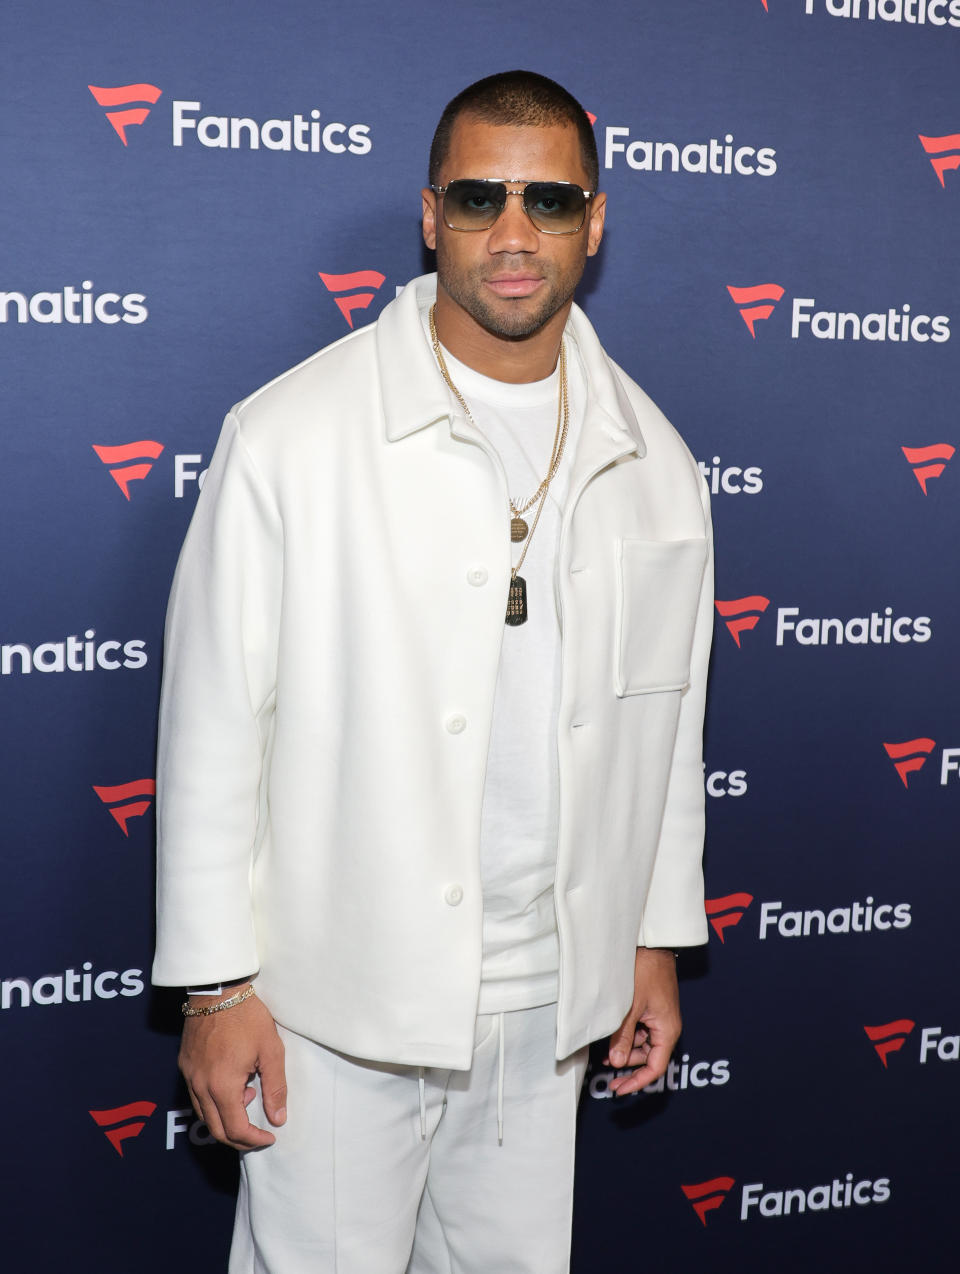 Russell Wilson at a Fanatics event, wearing a white jacket and pants, with sunglasses, and layered gold necklaces